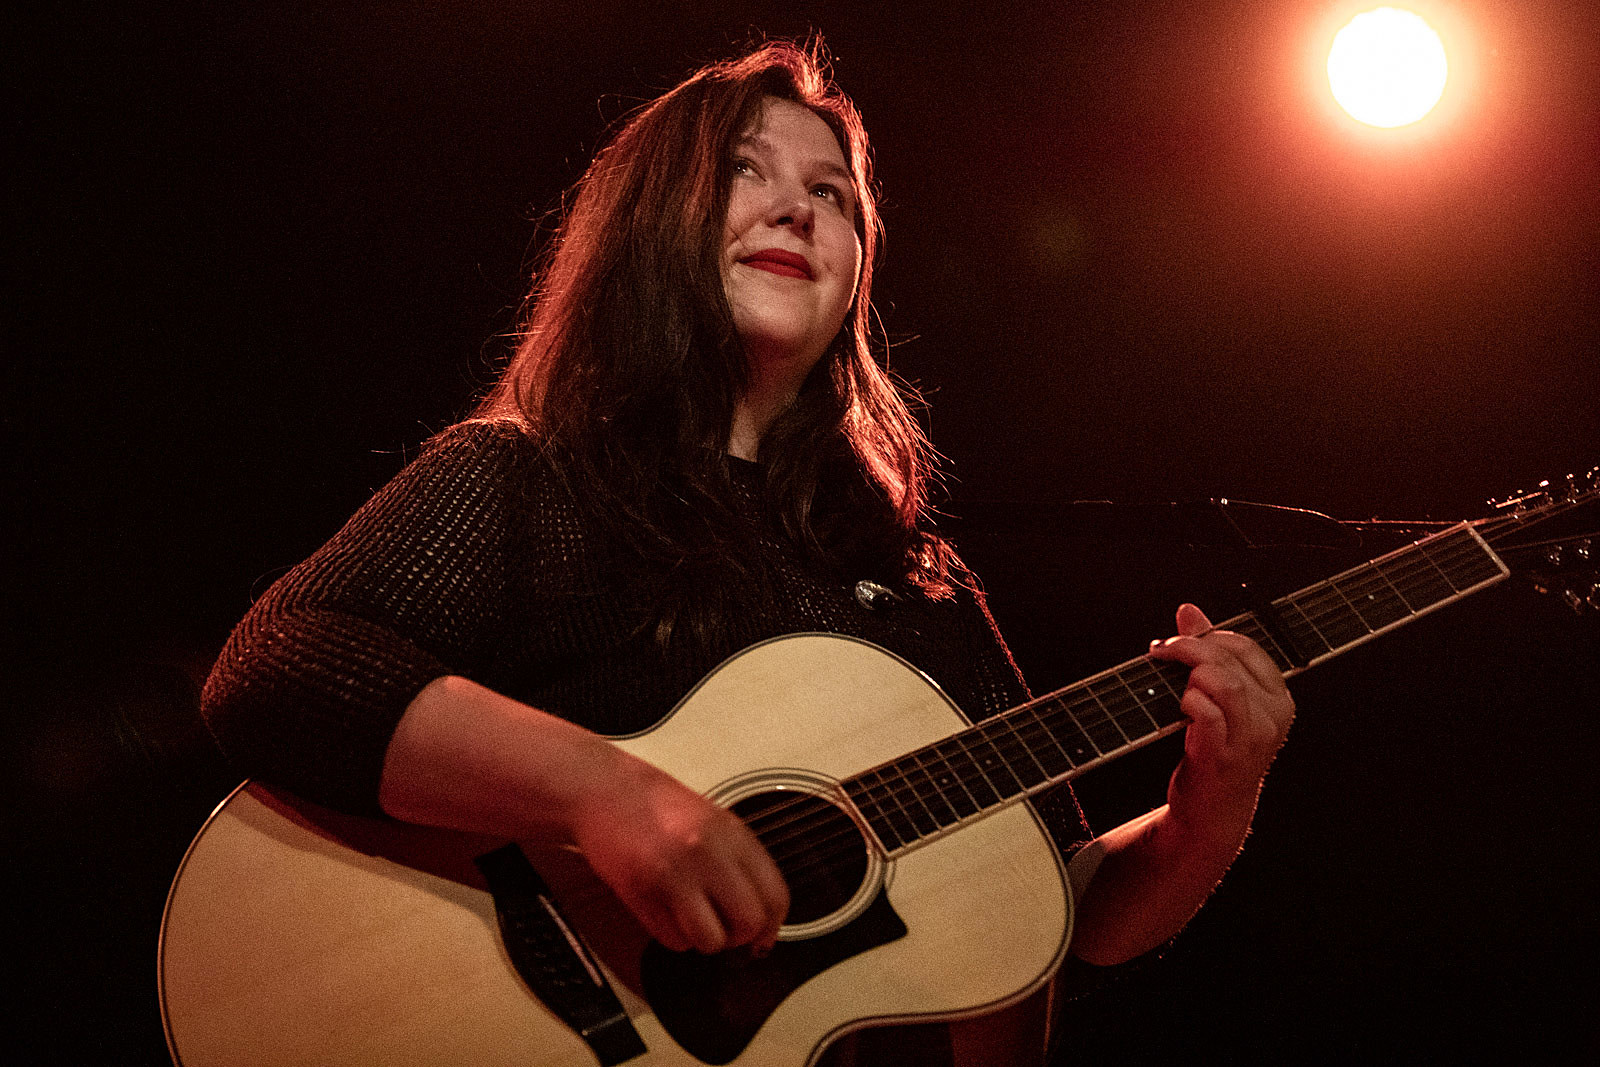 Lucy Dacus donating money from upcoming Texas shows to abortion funds